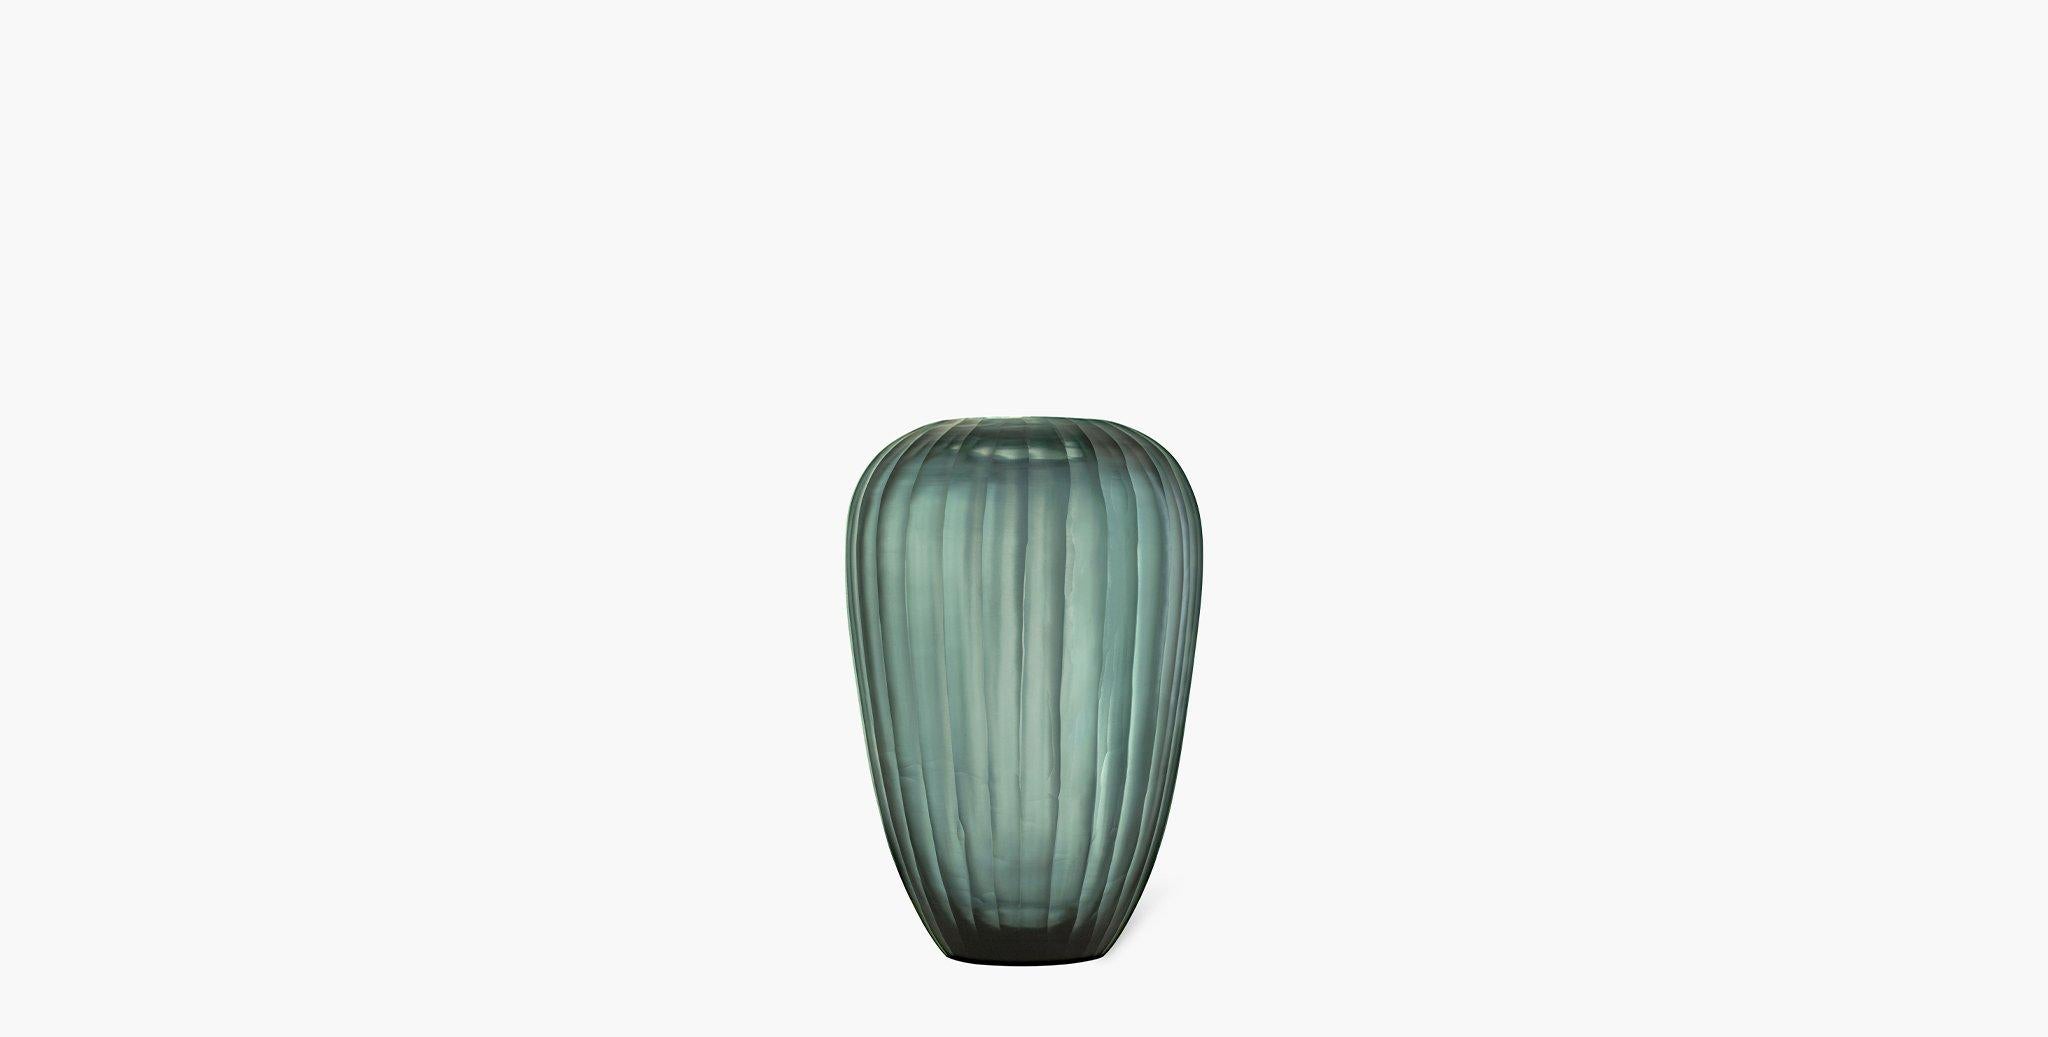 Our Grove Glass Vases feature a beautiful translucent matte indigo color that is reminiscent of sea glass.

Glass
Imported